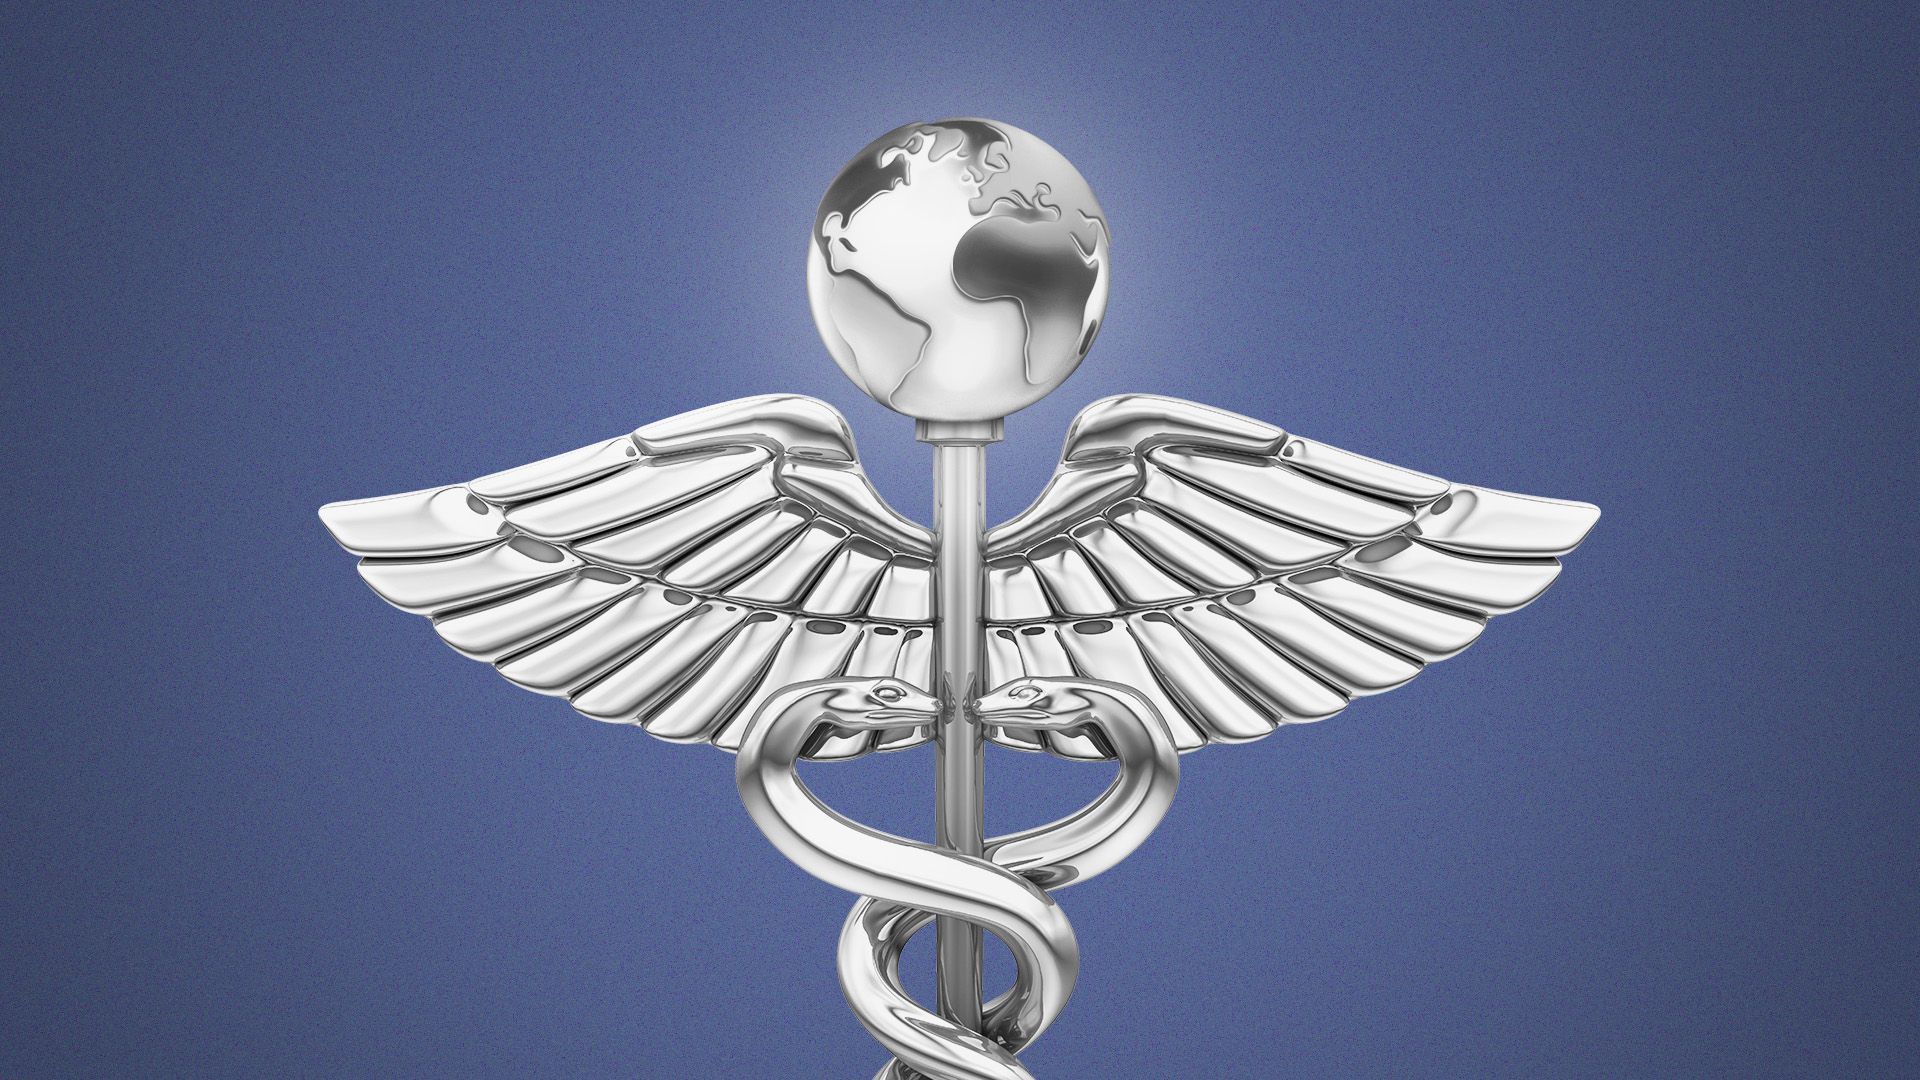 an illustration of a caduceus with a globe on top of it